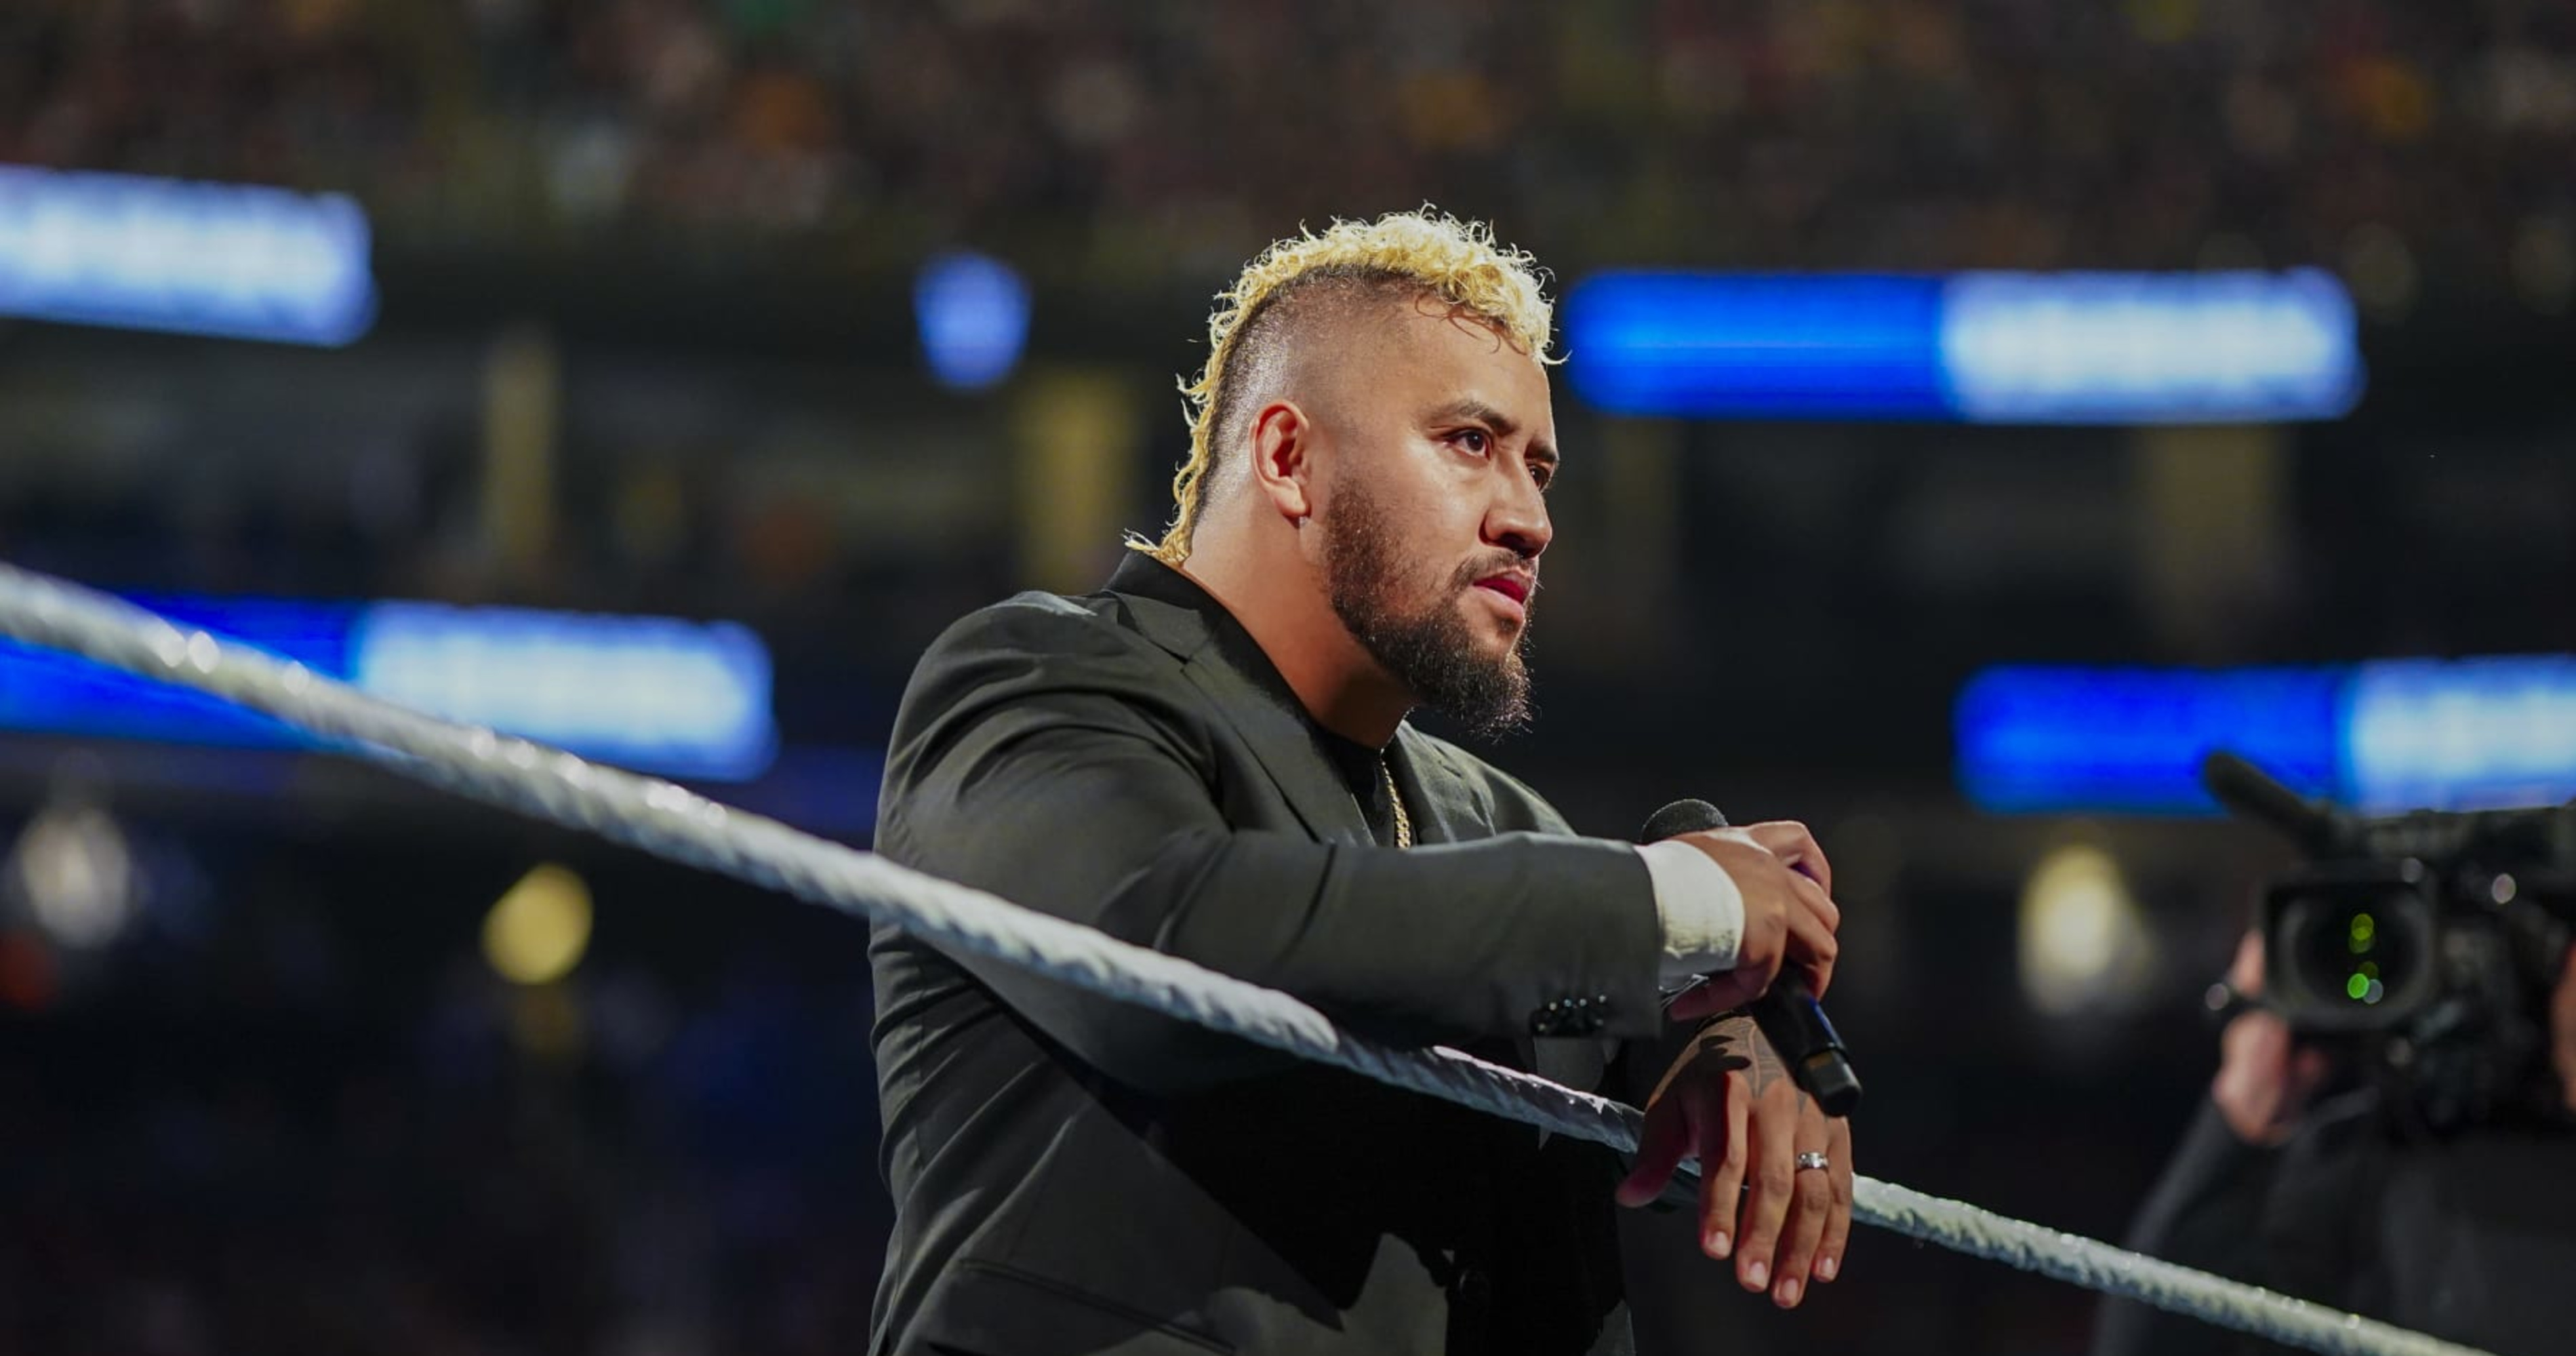 Backstage WWE and AEW Rumors: Latest on Solo Sikoa, Forbidden Door, and More